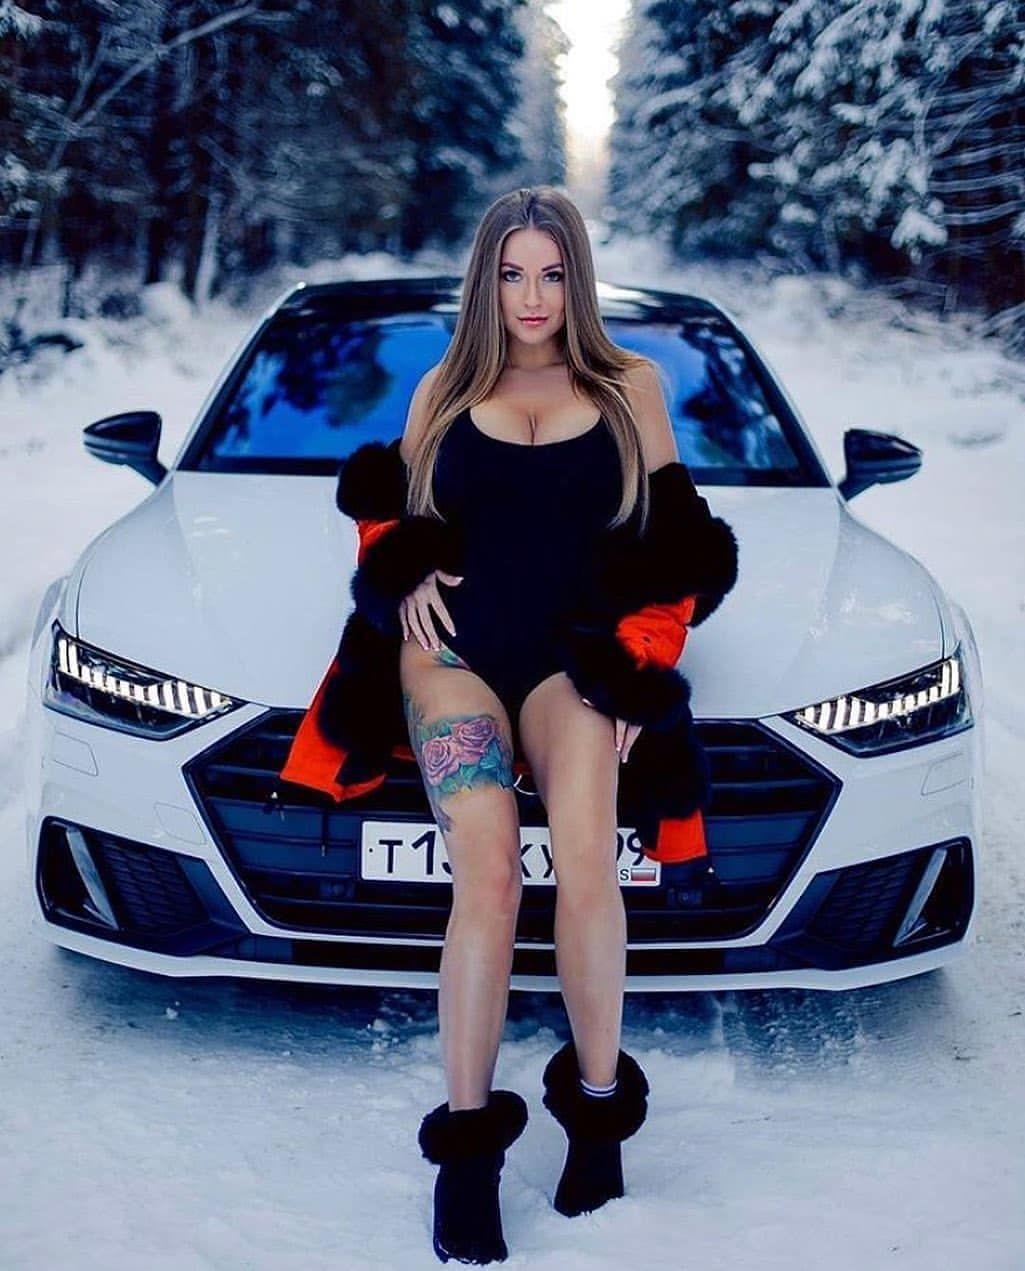 Petroljunkie_cars on Instagram: “I hate these kinds of pics, girls seating on cars trying to look sexy. Just stand next to it so you don’t damage the goods, infect just get…”